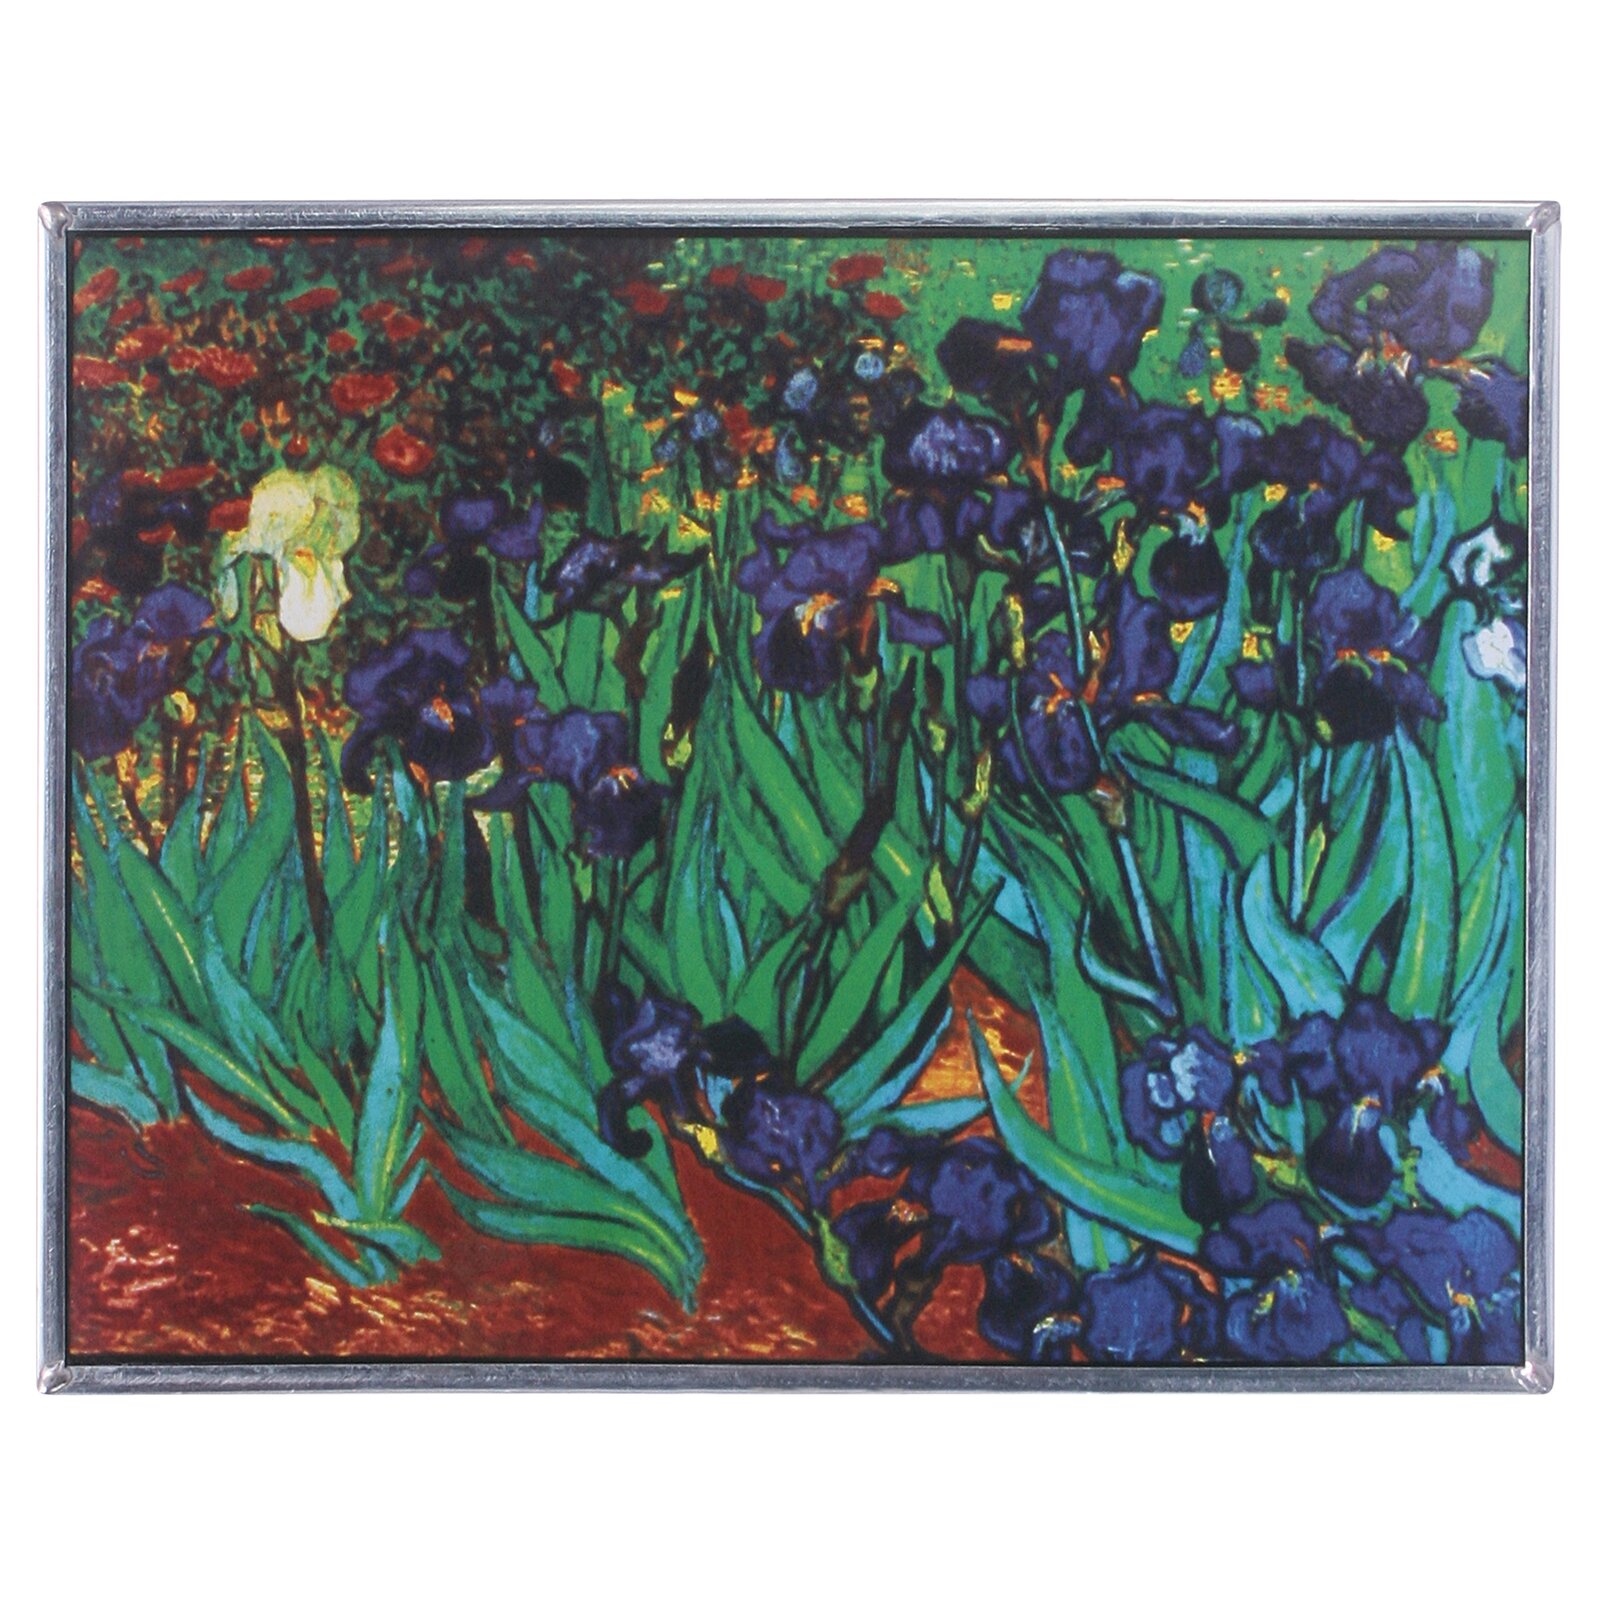 Stained Glass Wall Art - IIrises 1889 Art Glass Wall Décor